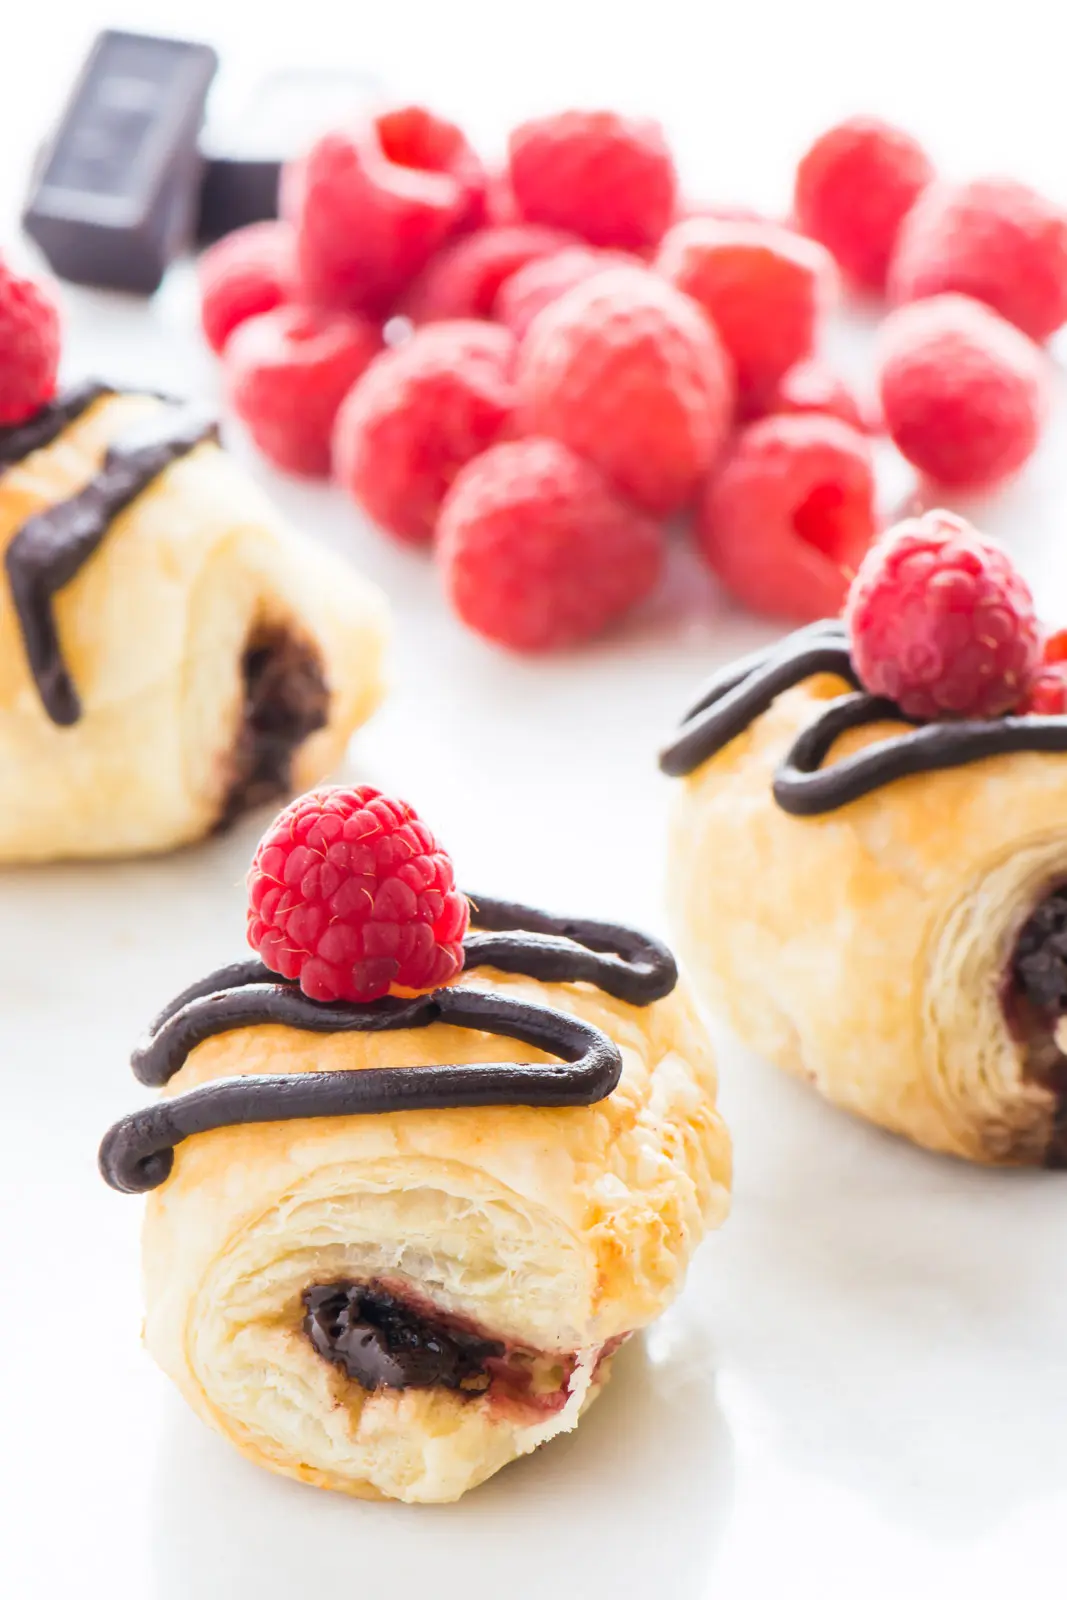 Several croissants show chocolate in the middle and red raspberries on top with a drizzle of chocolate glaze.